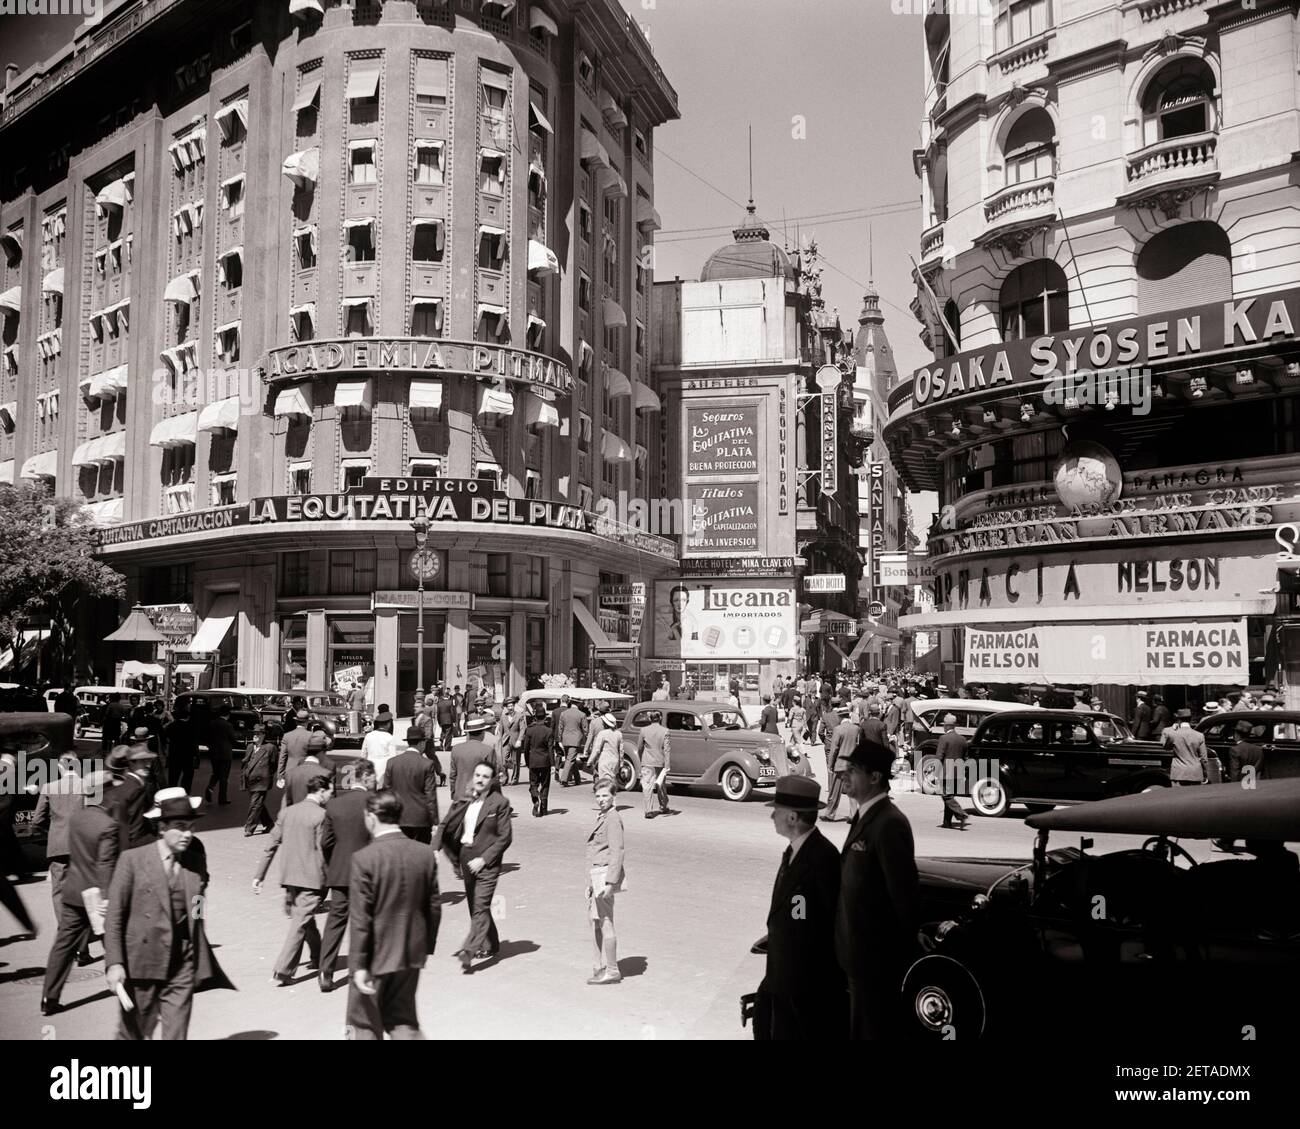 1930s 1940s PEDESTRIANS SHOPPERS CARS TRAFFIC STREET INTERSECTION BUILDINGS AVENIDA SANS ROCHES PENA BUENOS AIRES ARGENTINA - r12669 PAL001 HARS PEDESTRIANS TRANSPORTATION B&W SHOPPER SOUTH AMERICA WIDE ANGLE SHOPPERS SOUTH AMERICAN STRUCTURE HIGH ANGLE PROPERTY AUTOS REAL ESTATE CONCEPTUAL STRUCTURES AUTOMOBILES CITIES VEHICLES ARGENTINA AVENIDA EDIFICE AIRES BUENOS PENA STREET SCENE BLACK AND WHITE OLD FASHIONED Stock Photo